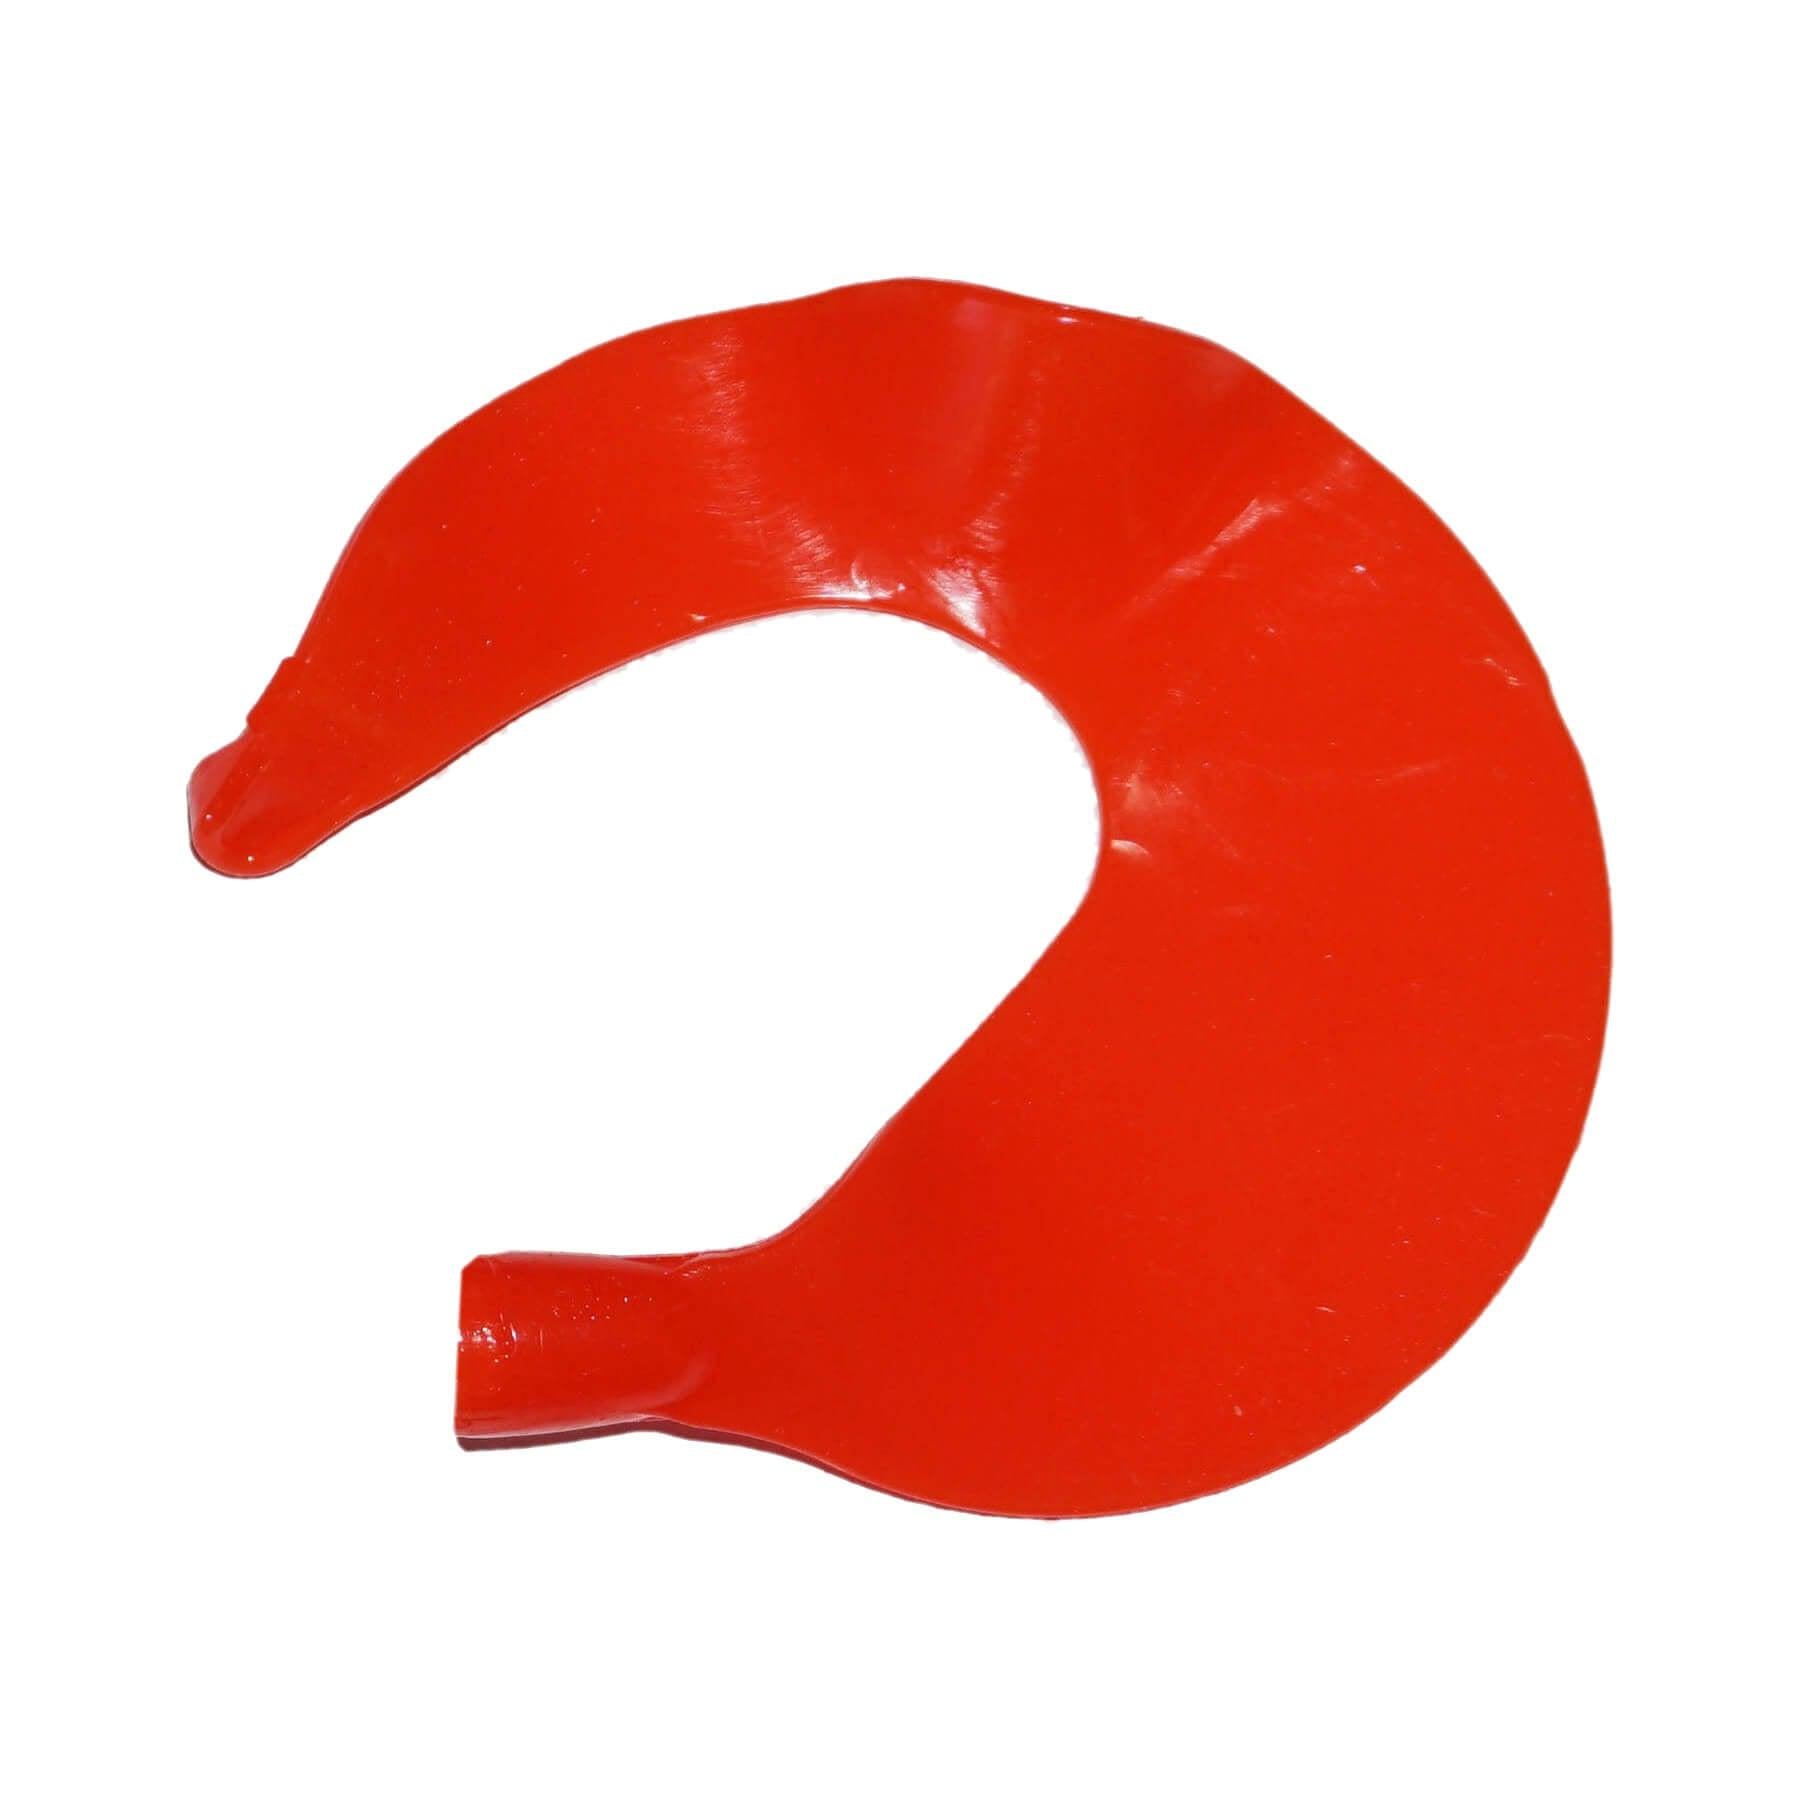 View of Lures_Add-on Whale Tail Plastics 11" Replacement Tail Orange available at EZOKO Pike and Musky Shop